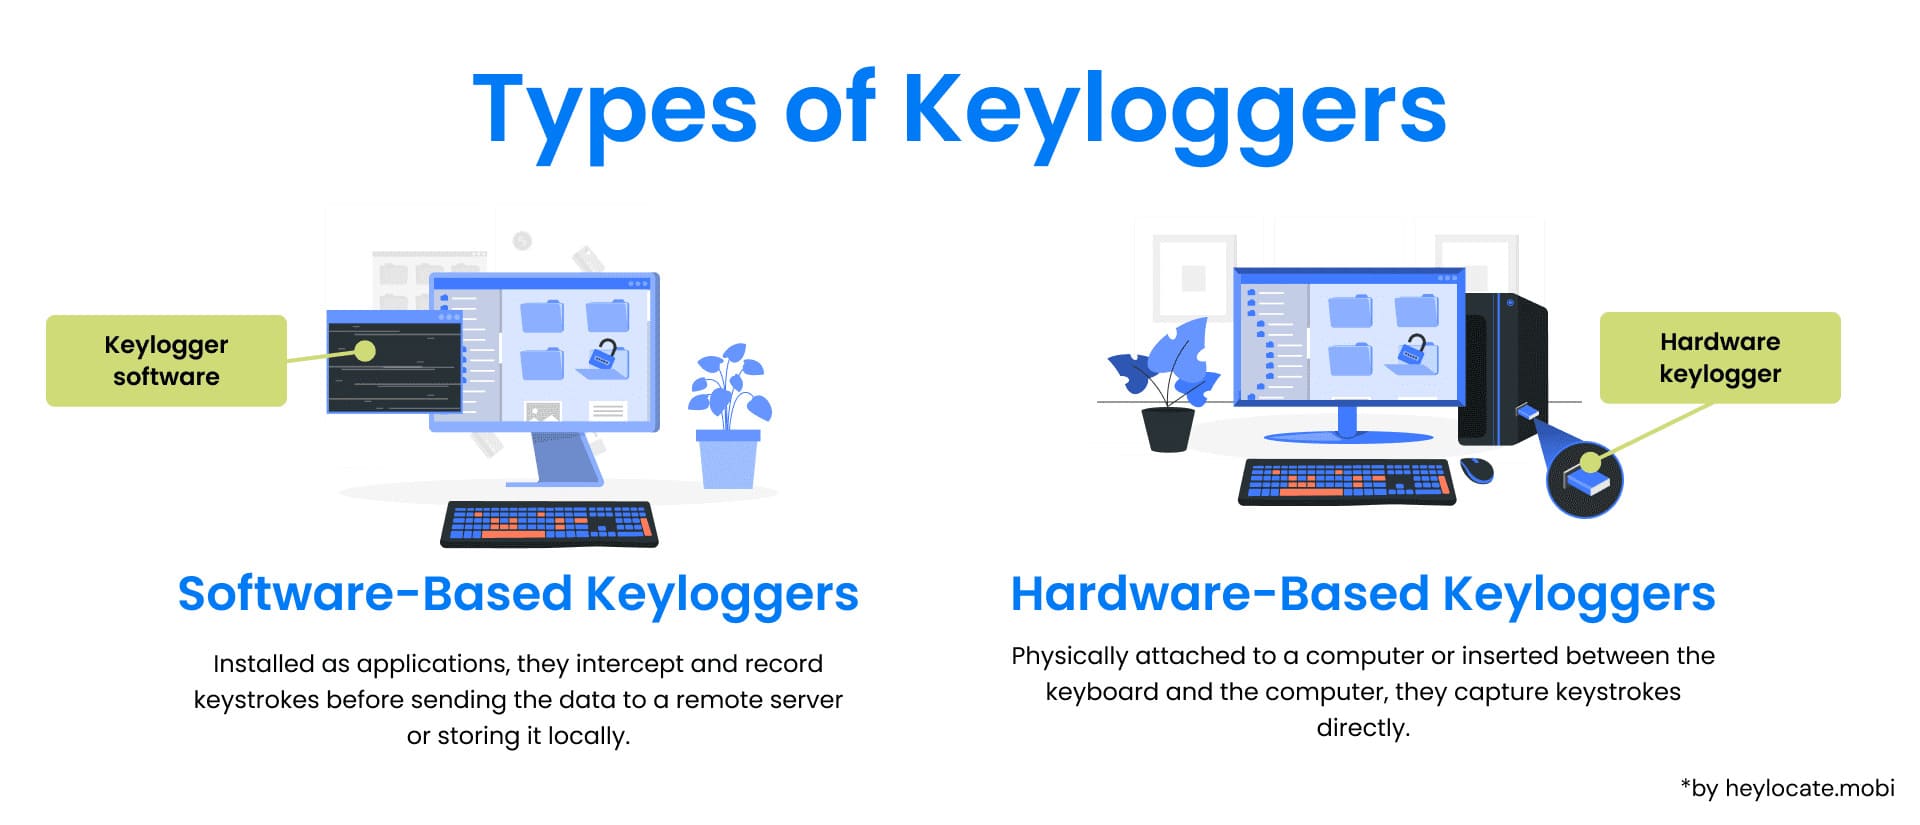 Illustrated comparison between software-based keyloggers and hardware-based keyloggers, showing their modes of operation